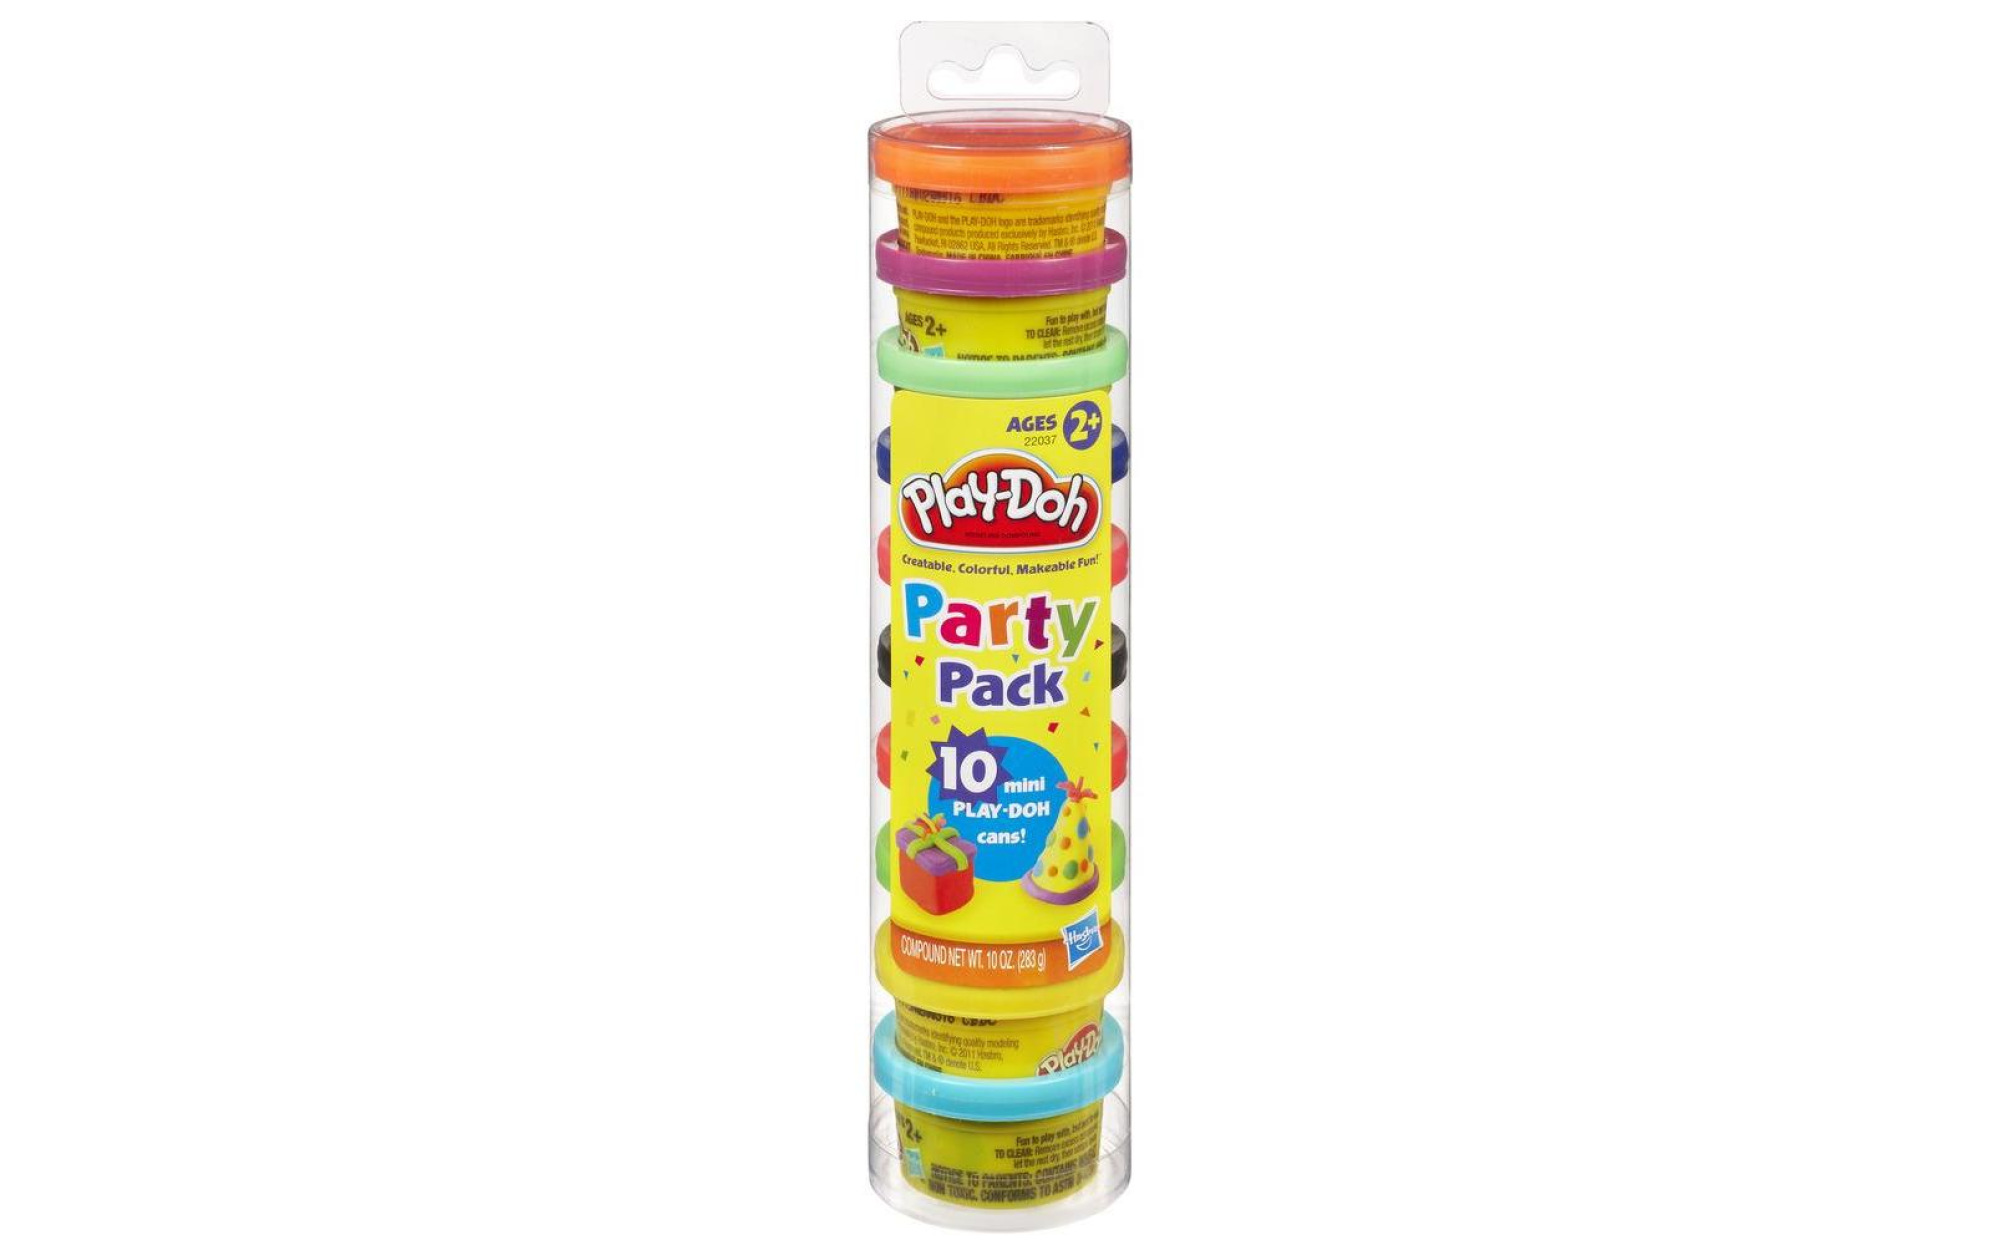 Play-Doh Party Pack (10 cans) – Art Therapy